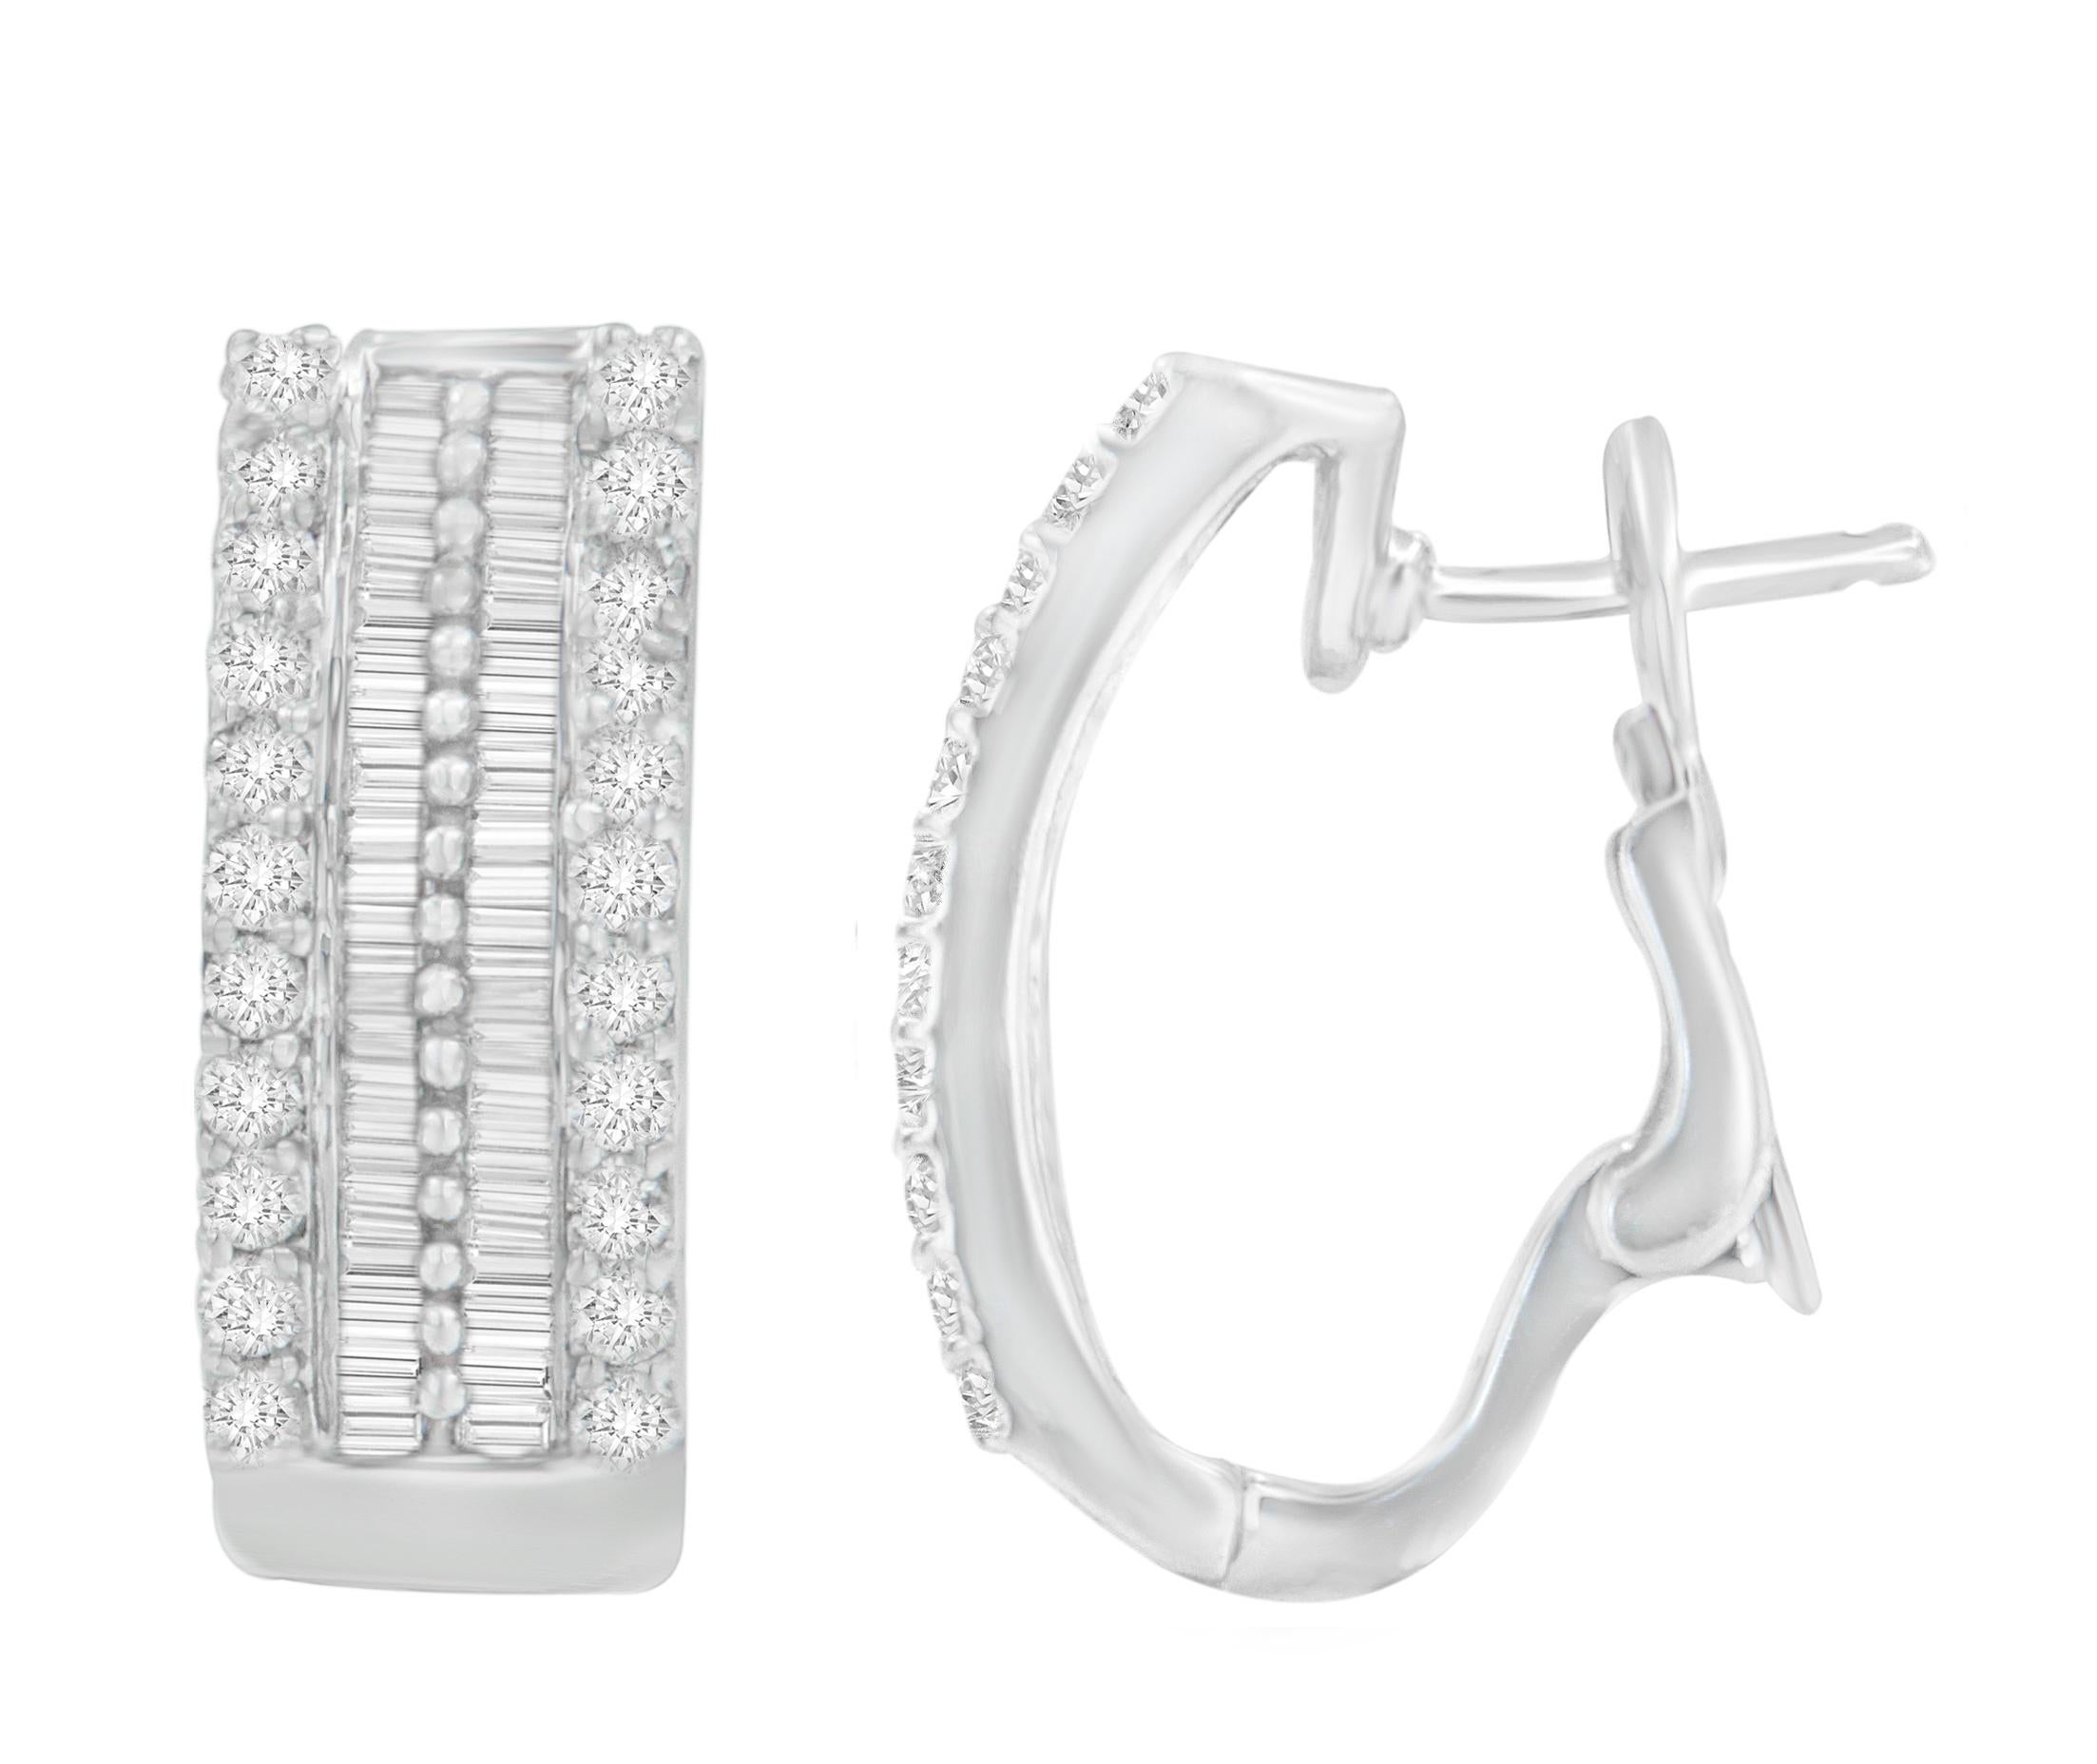 Surprise her with this pair of stunning 14k white gold and diamond hoop earrings.  Each elegantly rounded piece is filled with pave and channel set baguette and round cut diamonds.  Alternating rows of shimmering diamonds create a classic pattern